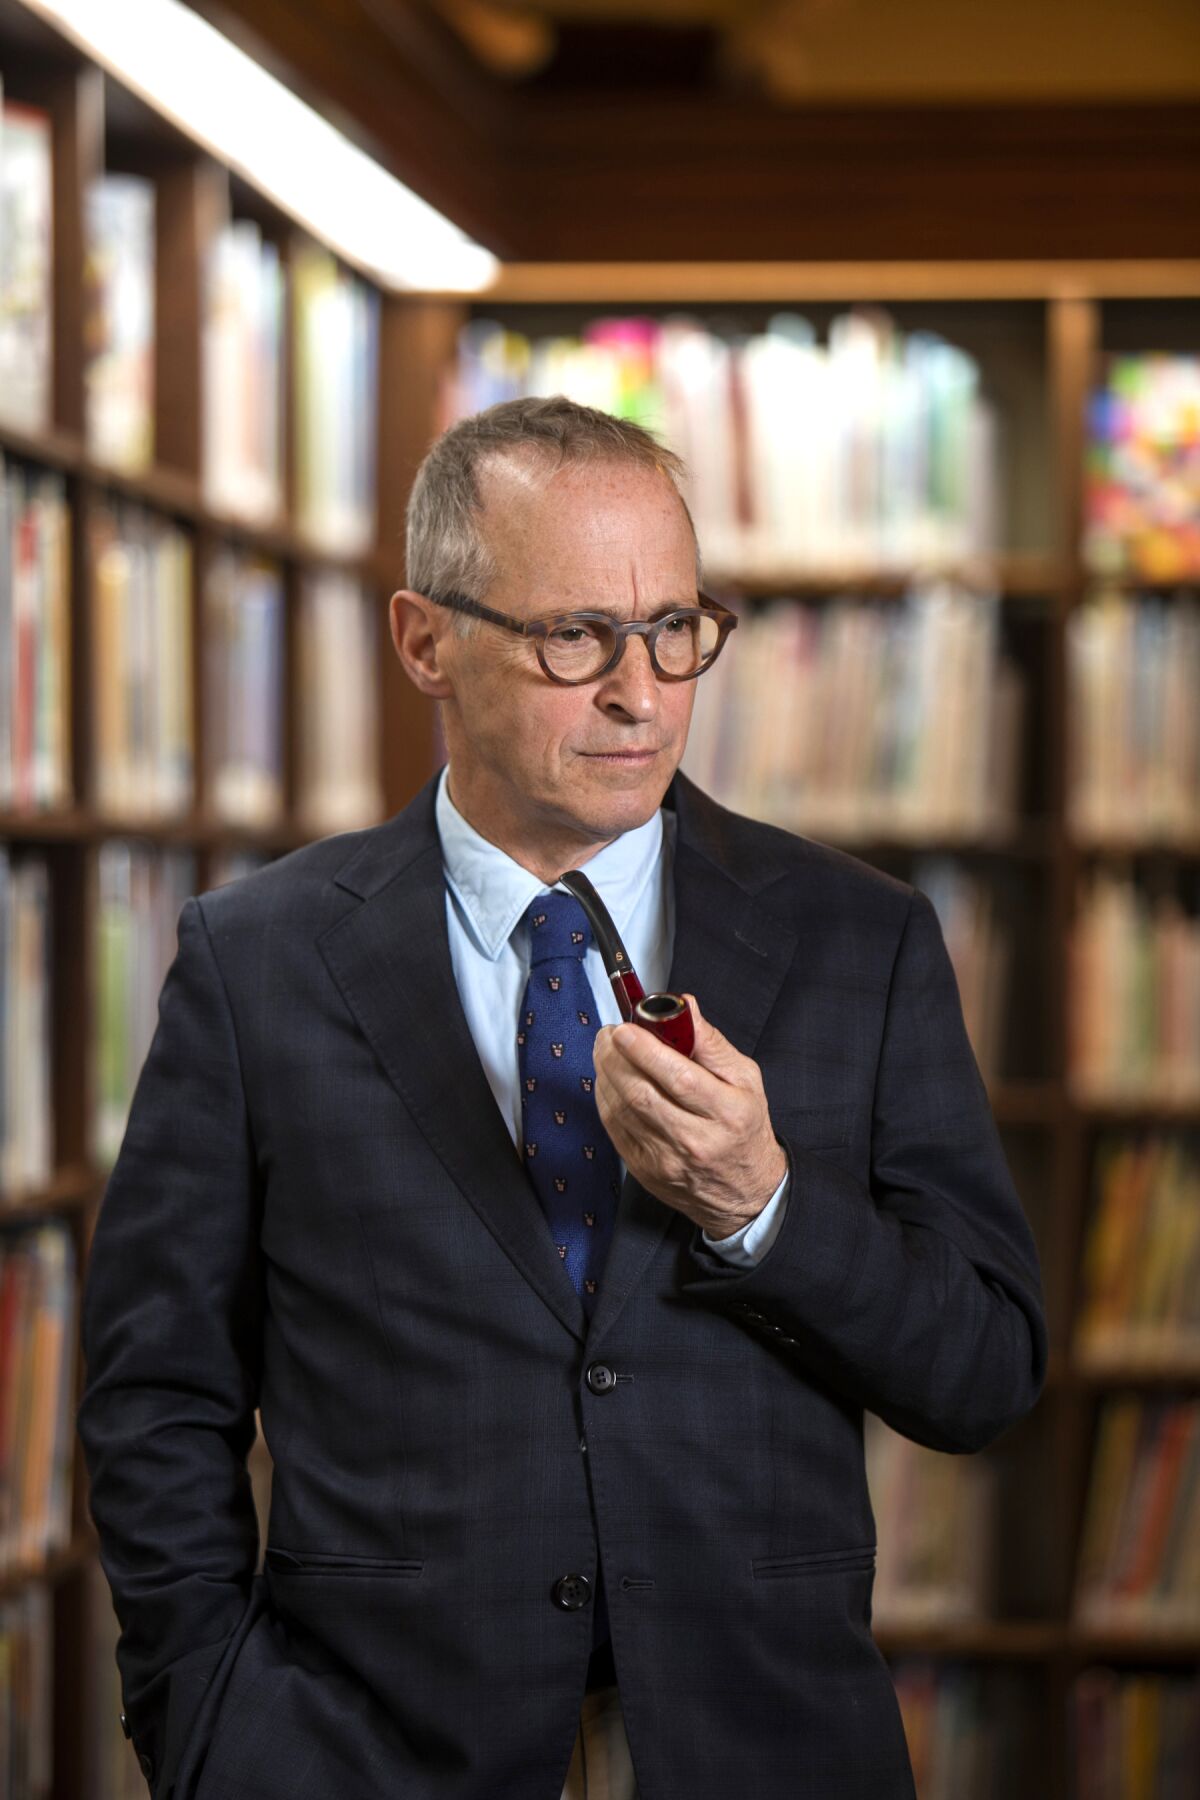 A man, wearing a suit and tie and holding a pipe, stands among bookshelves.